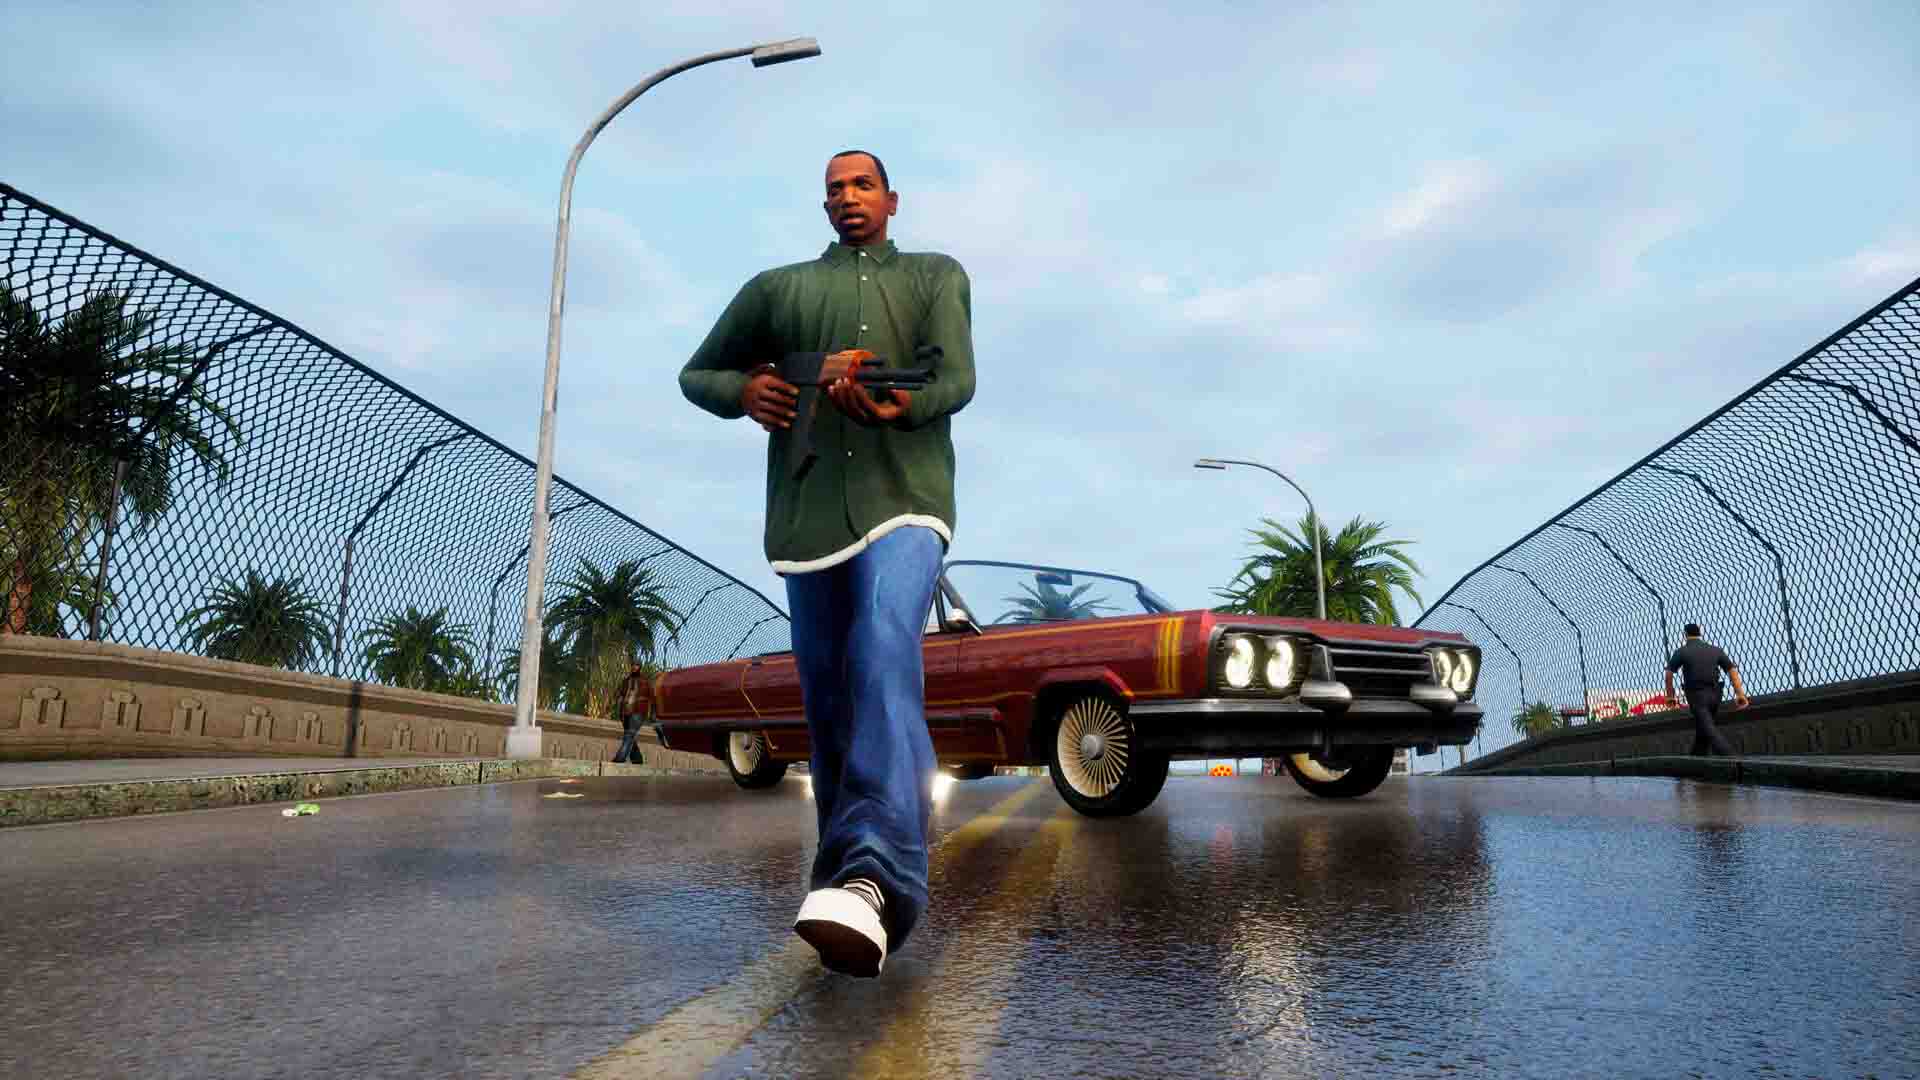 Grand Theft Auto: San Andreas – The Definitive Edition (GTA SA Trilogy) System Requirements for minimum, recommended specifications for PC Windows 10/11, macOS, & Linux.